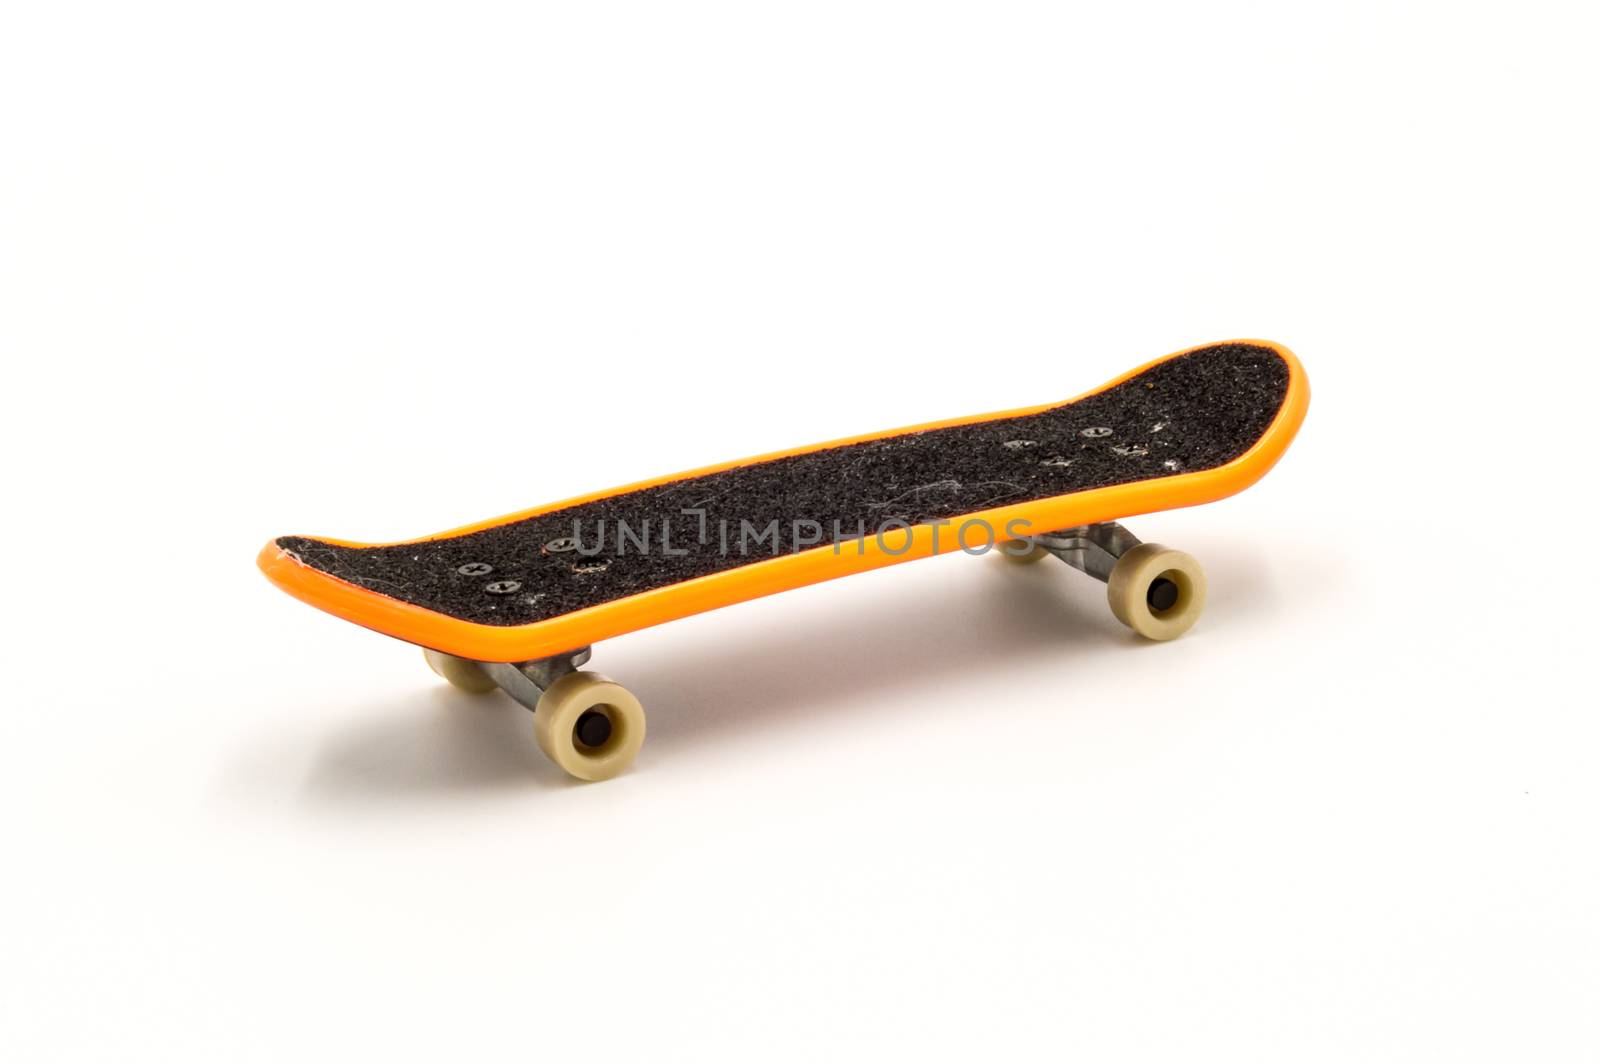 Blank skateboard template mockup isolated on a white background